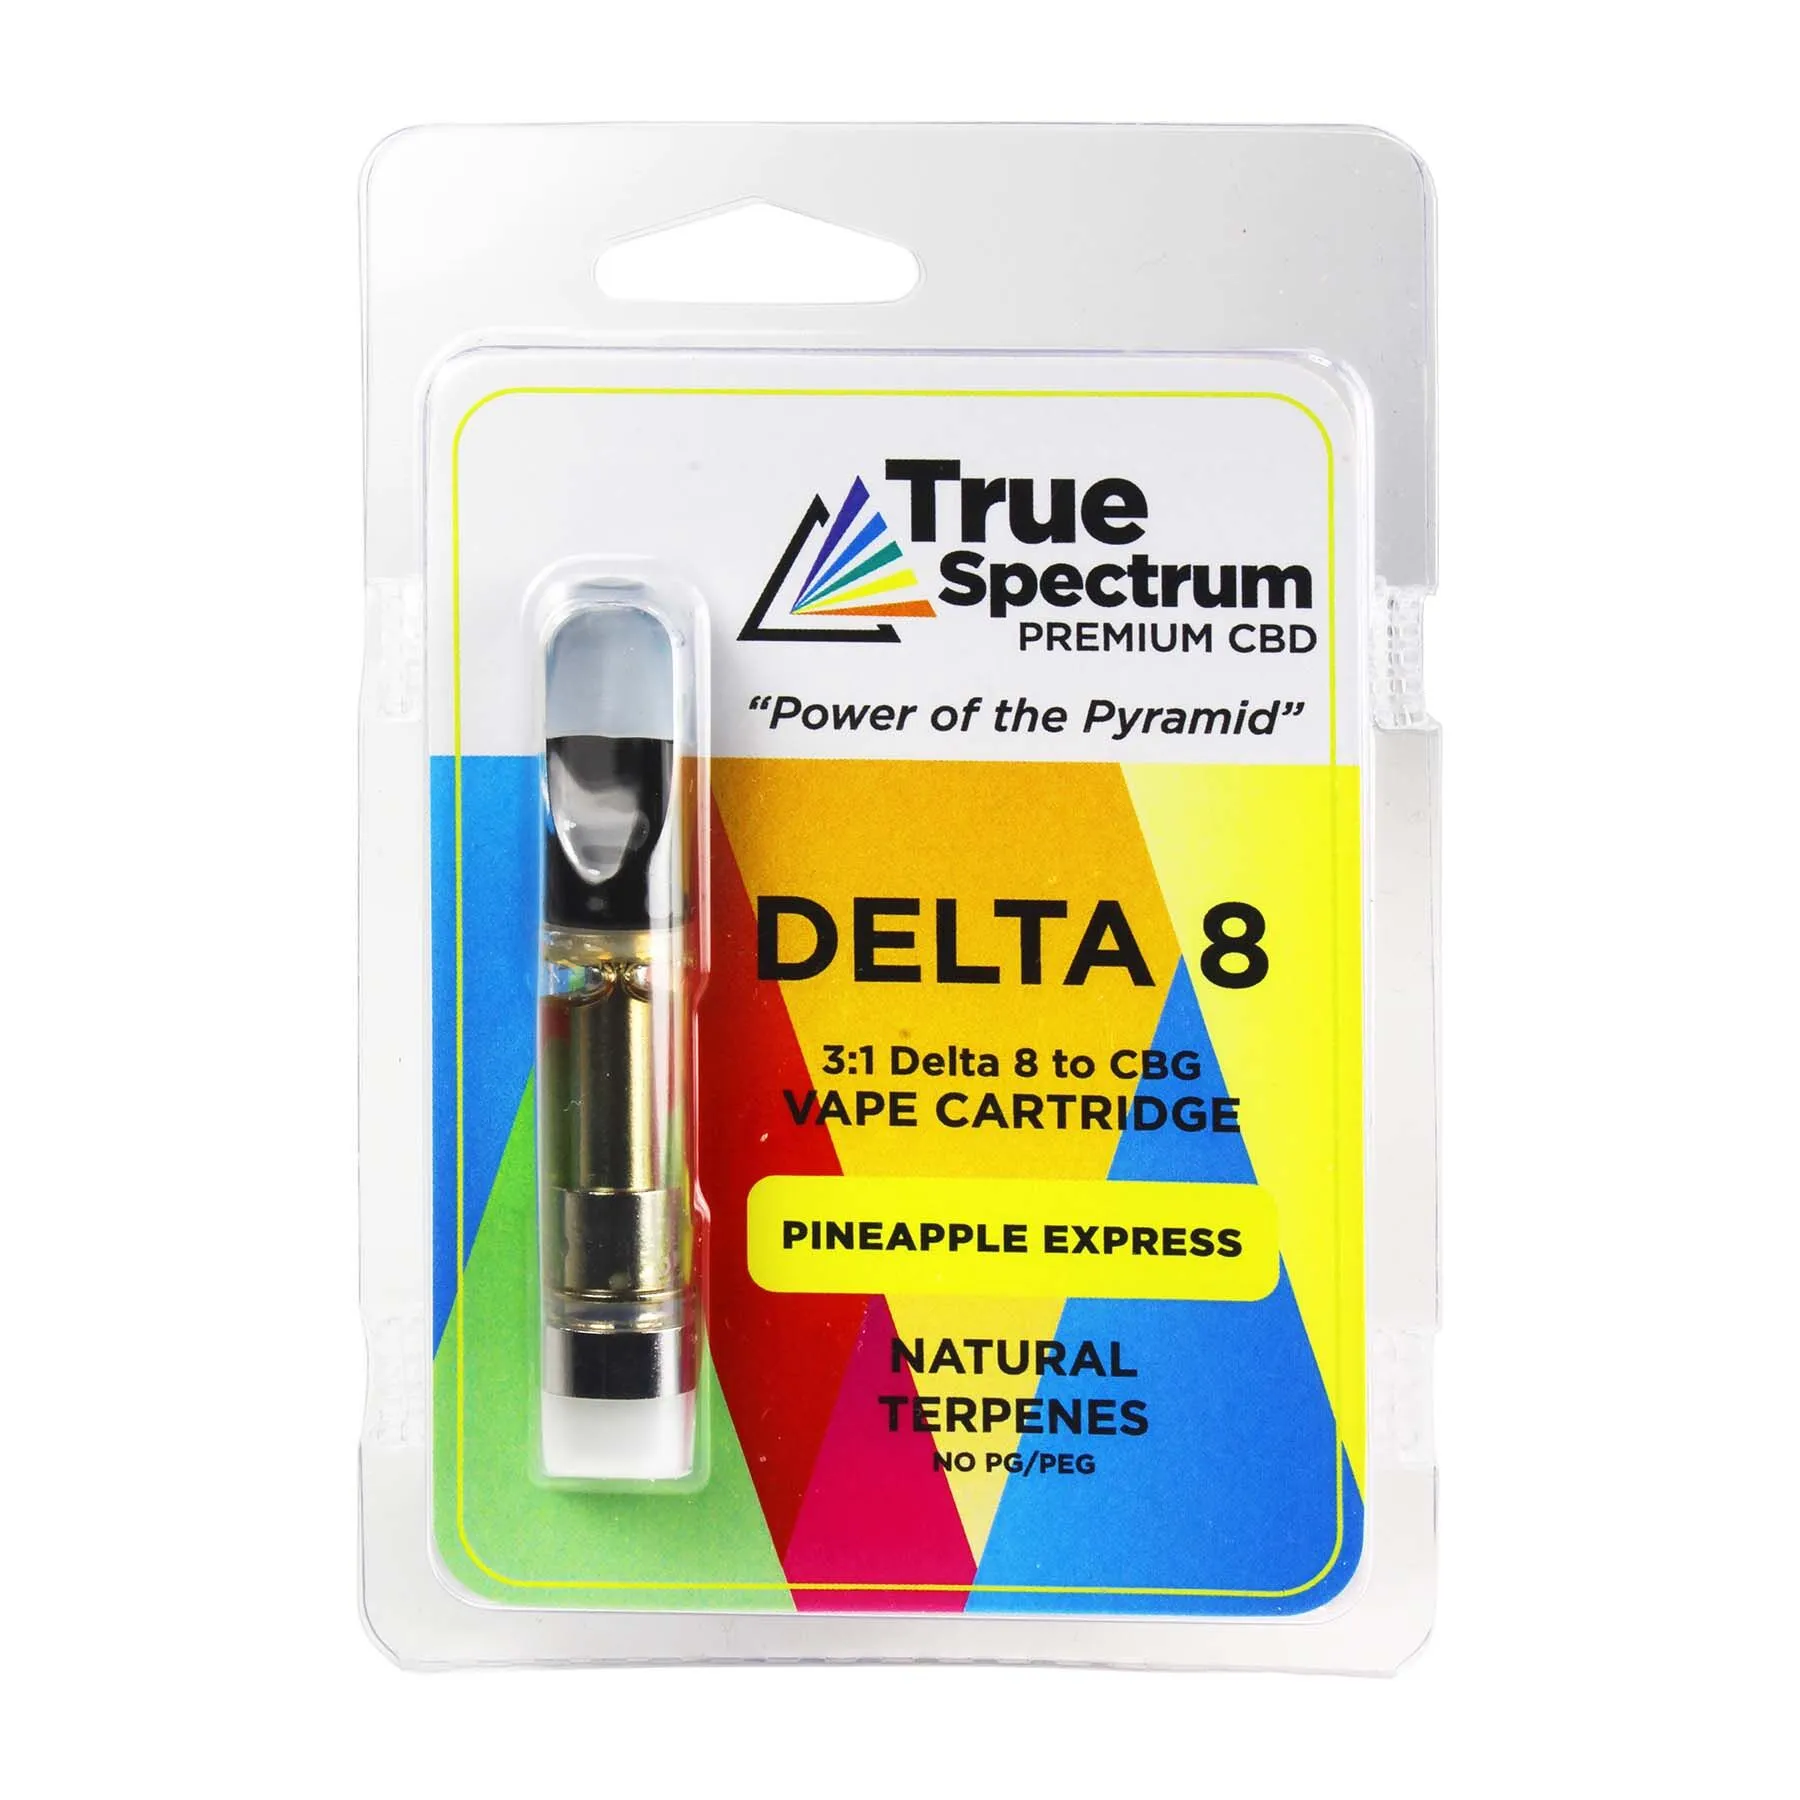 DELTA-8 By My True Spectrum-The Ultimate Review of Top DELTA-8 Products